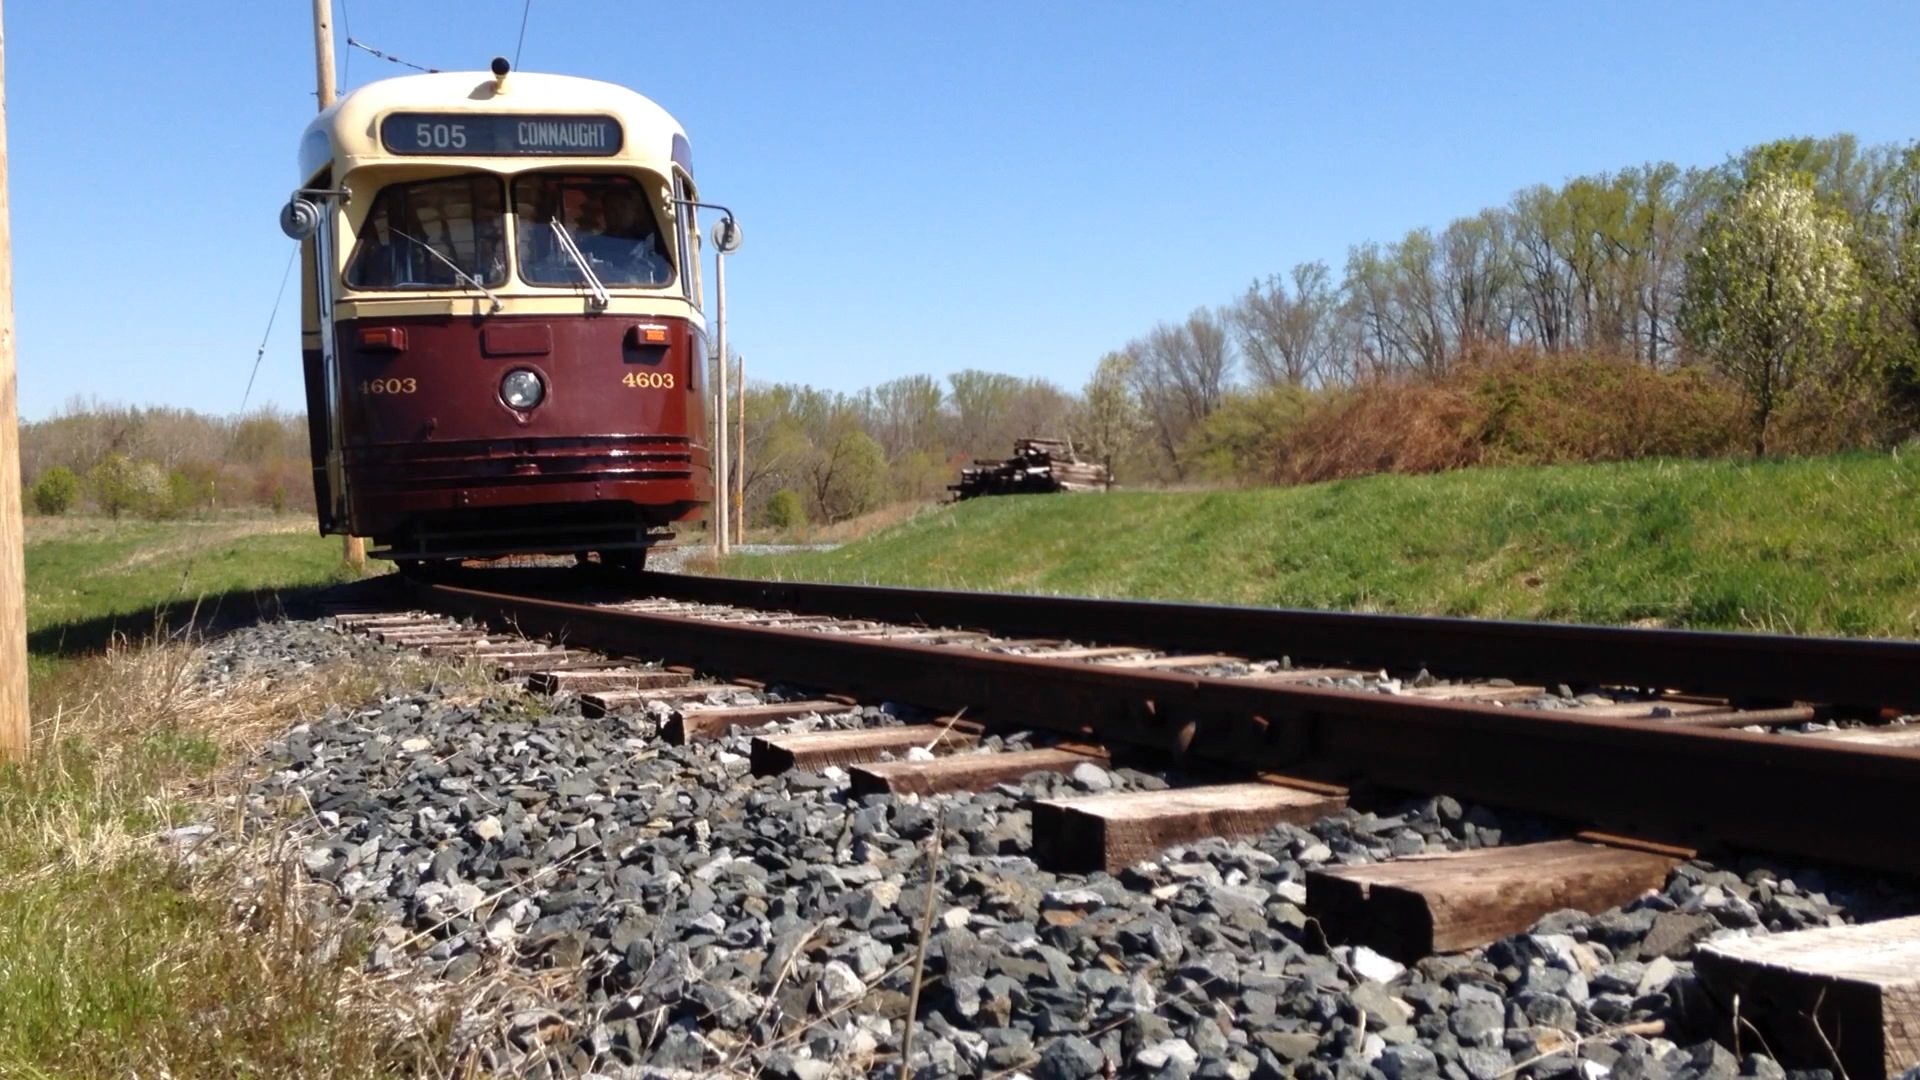 As streetcars return, a look at trolley-era technology